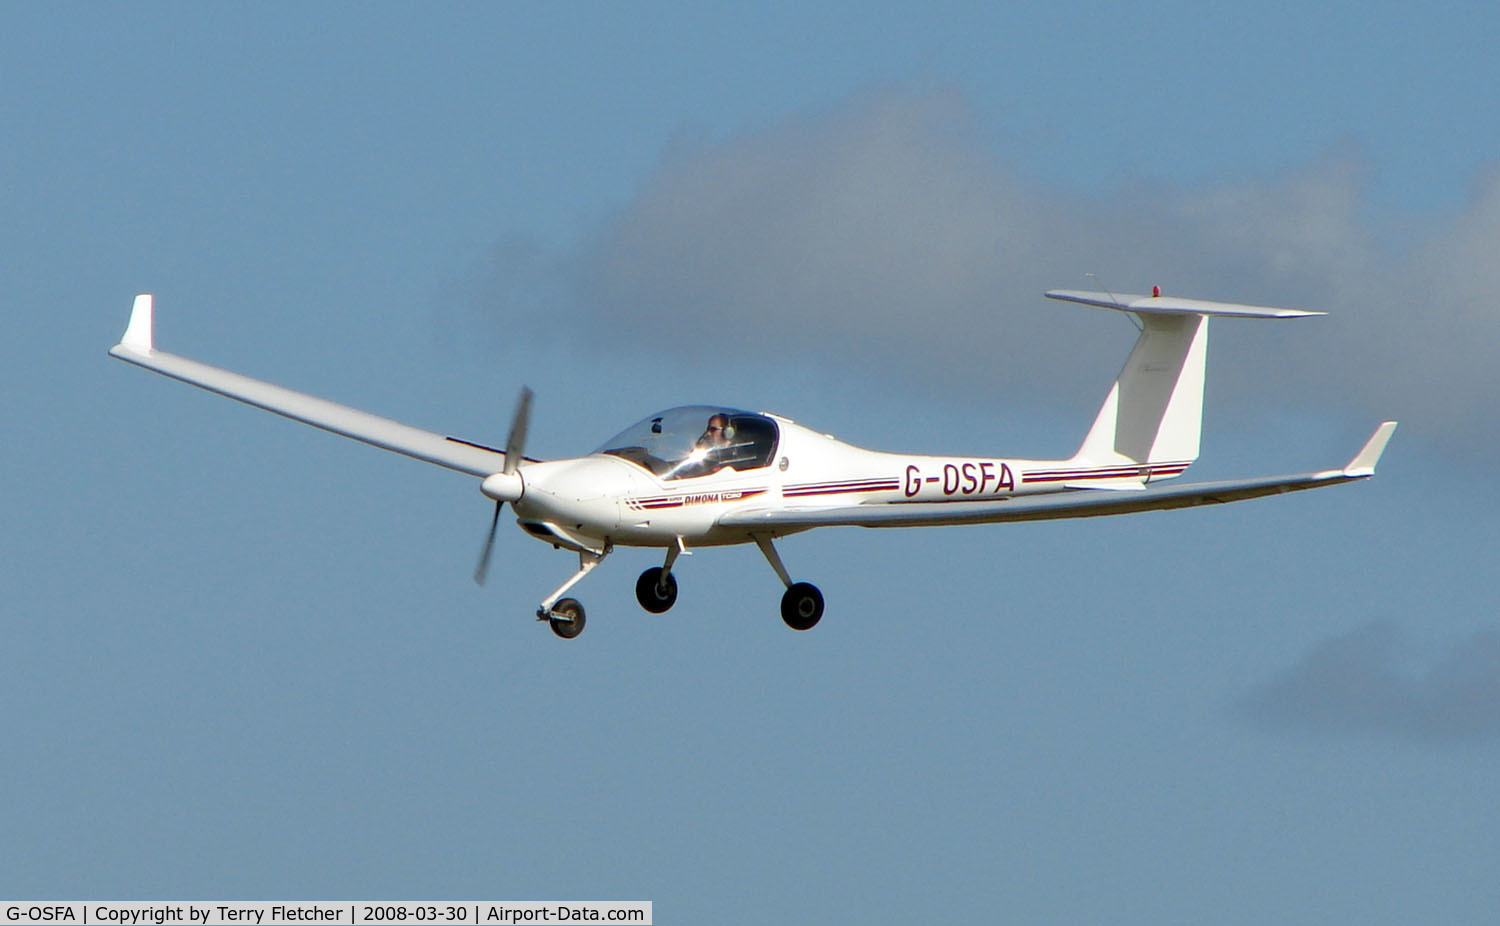 G-OSFA, 1999 Diamond HK-36TC Super Dimona C/N 36649, One aircraft at the friendly Enstone Airfield in Oxfordshire